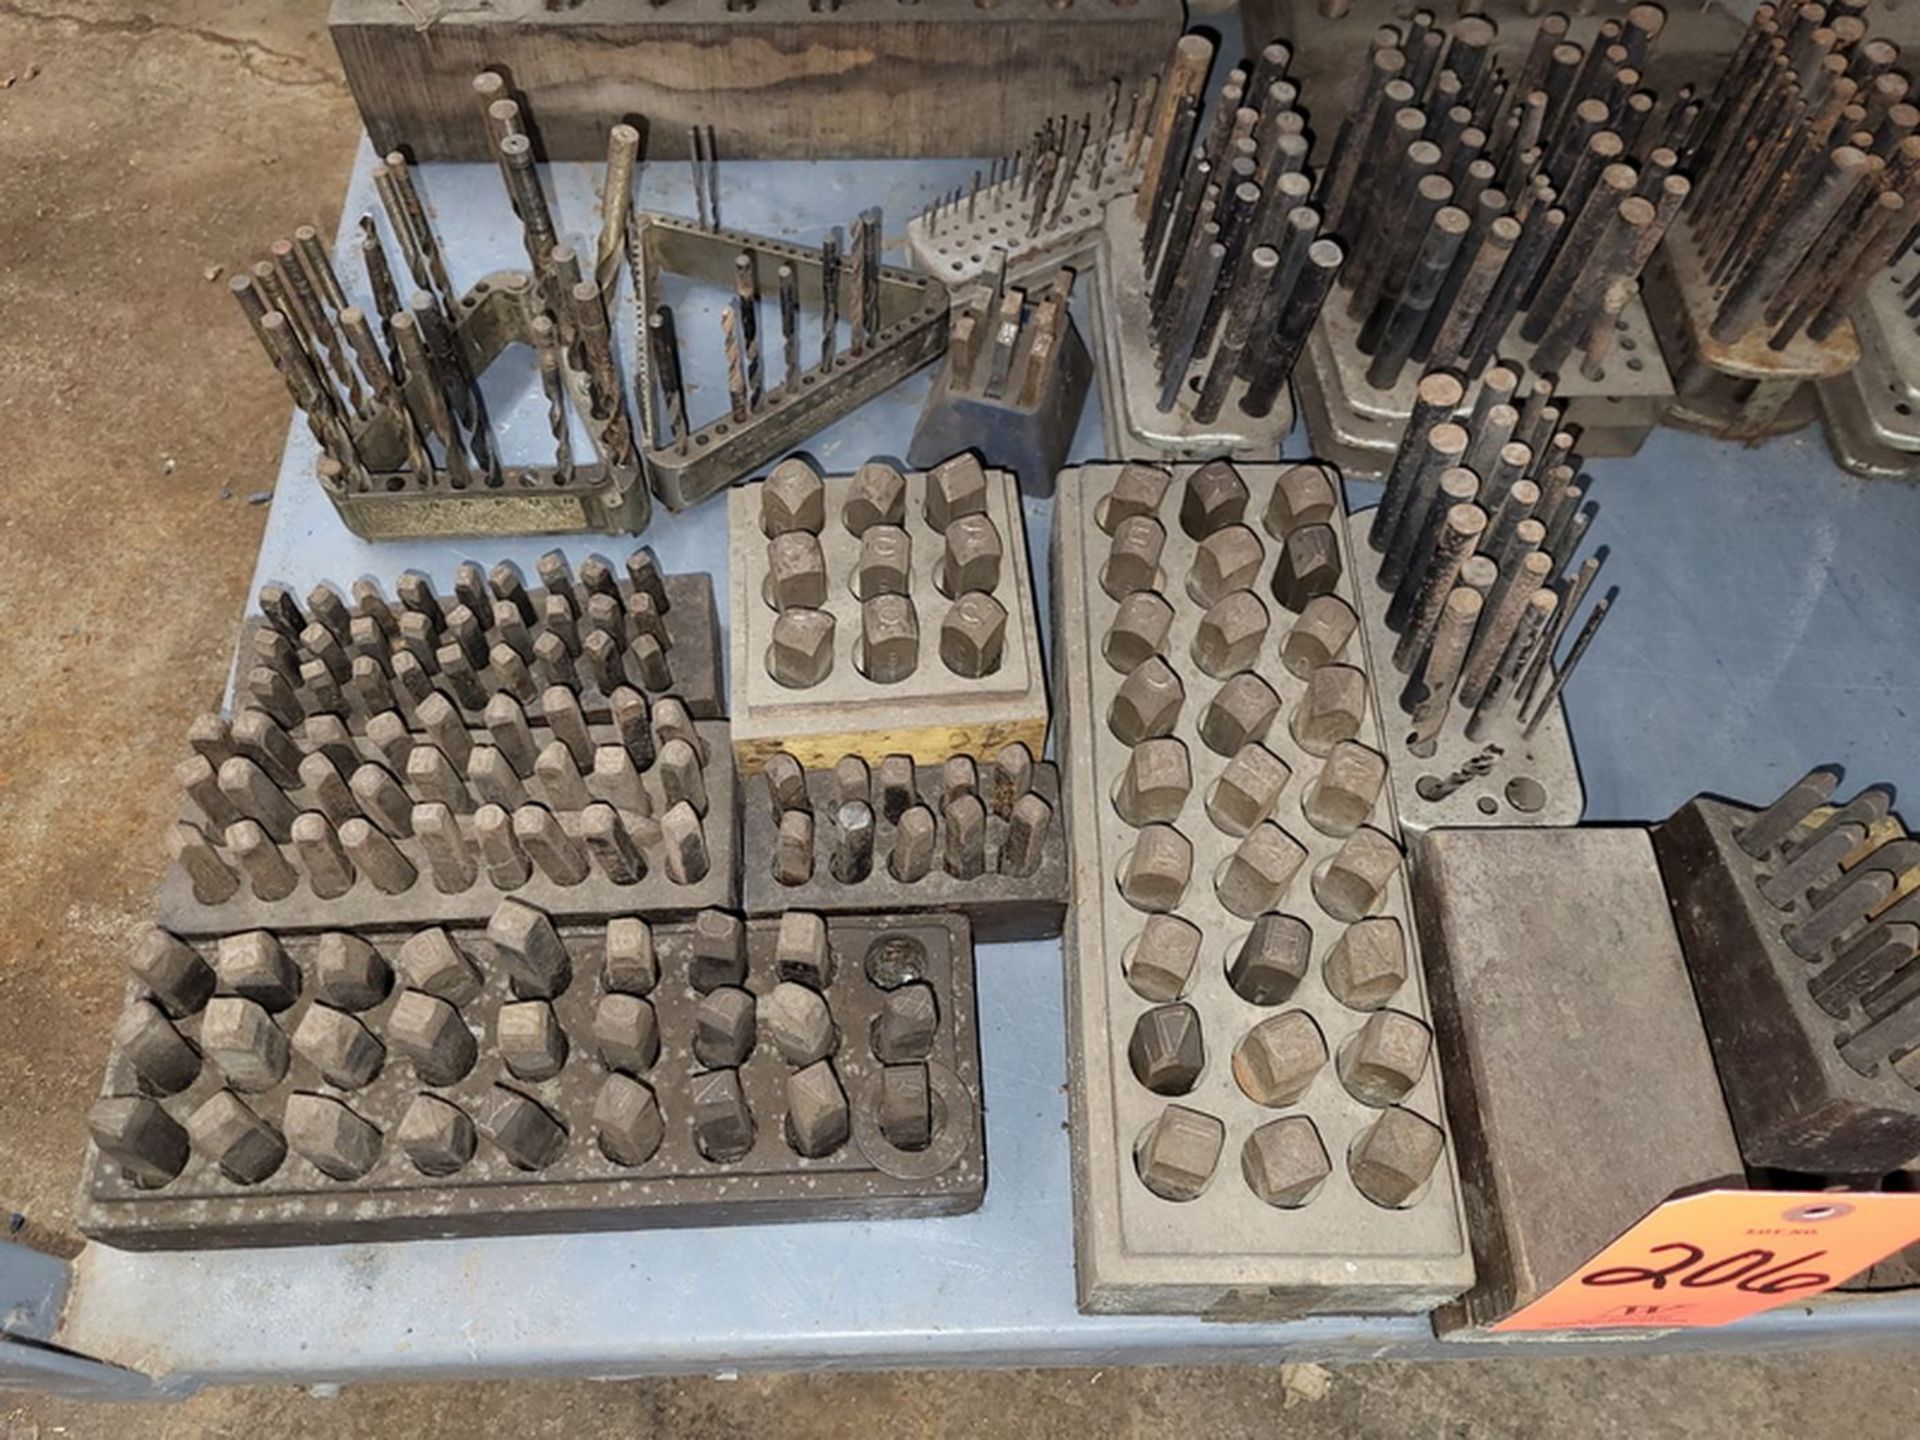 Lot - Assorted Number/Letter Stamps, Transfer Punches, Drills, Reamers and End Mills - Image 2 of 5